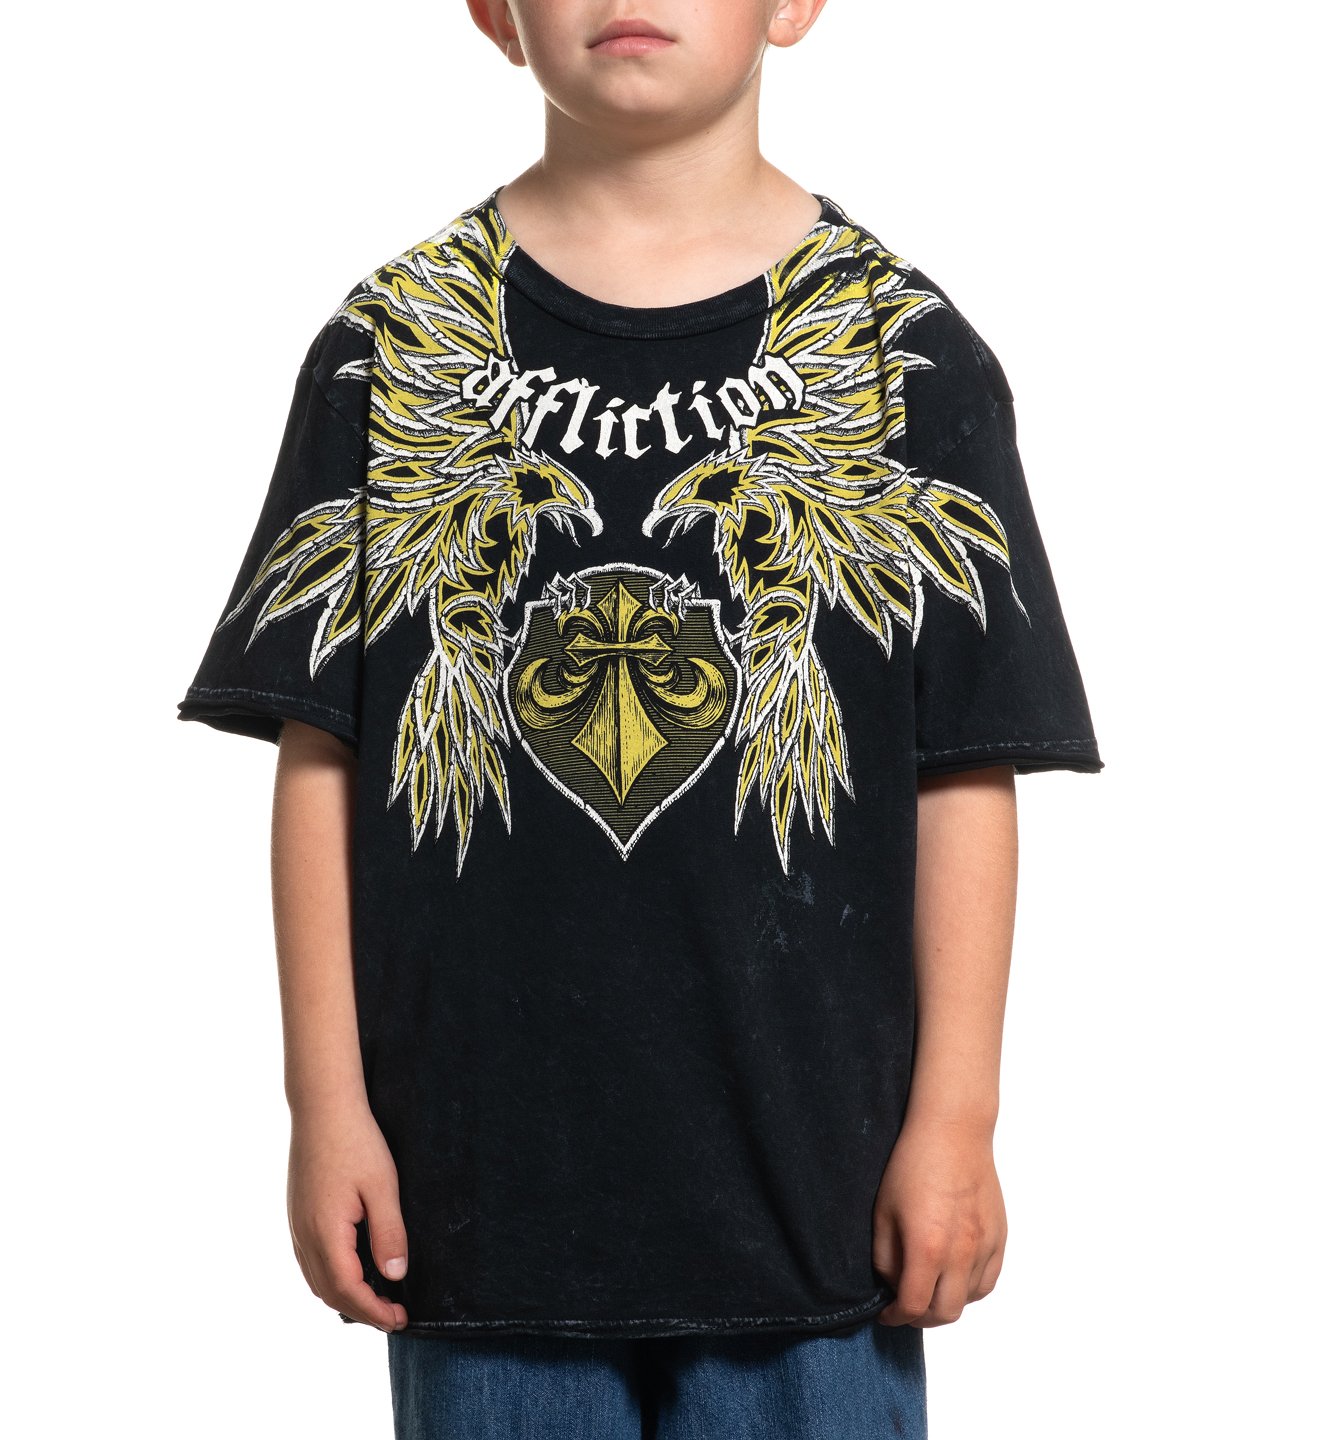 Departure-Youth - Kids Short Sleeve Tees - Affliction Clothing